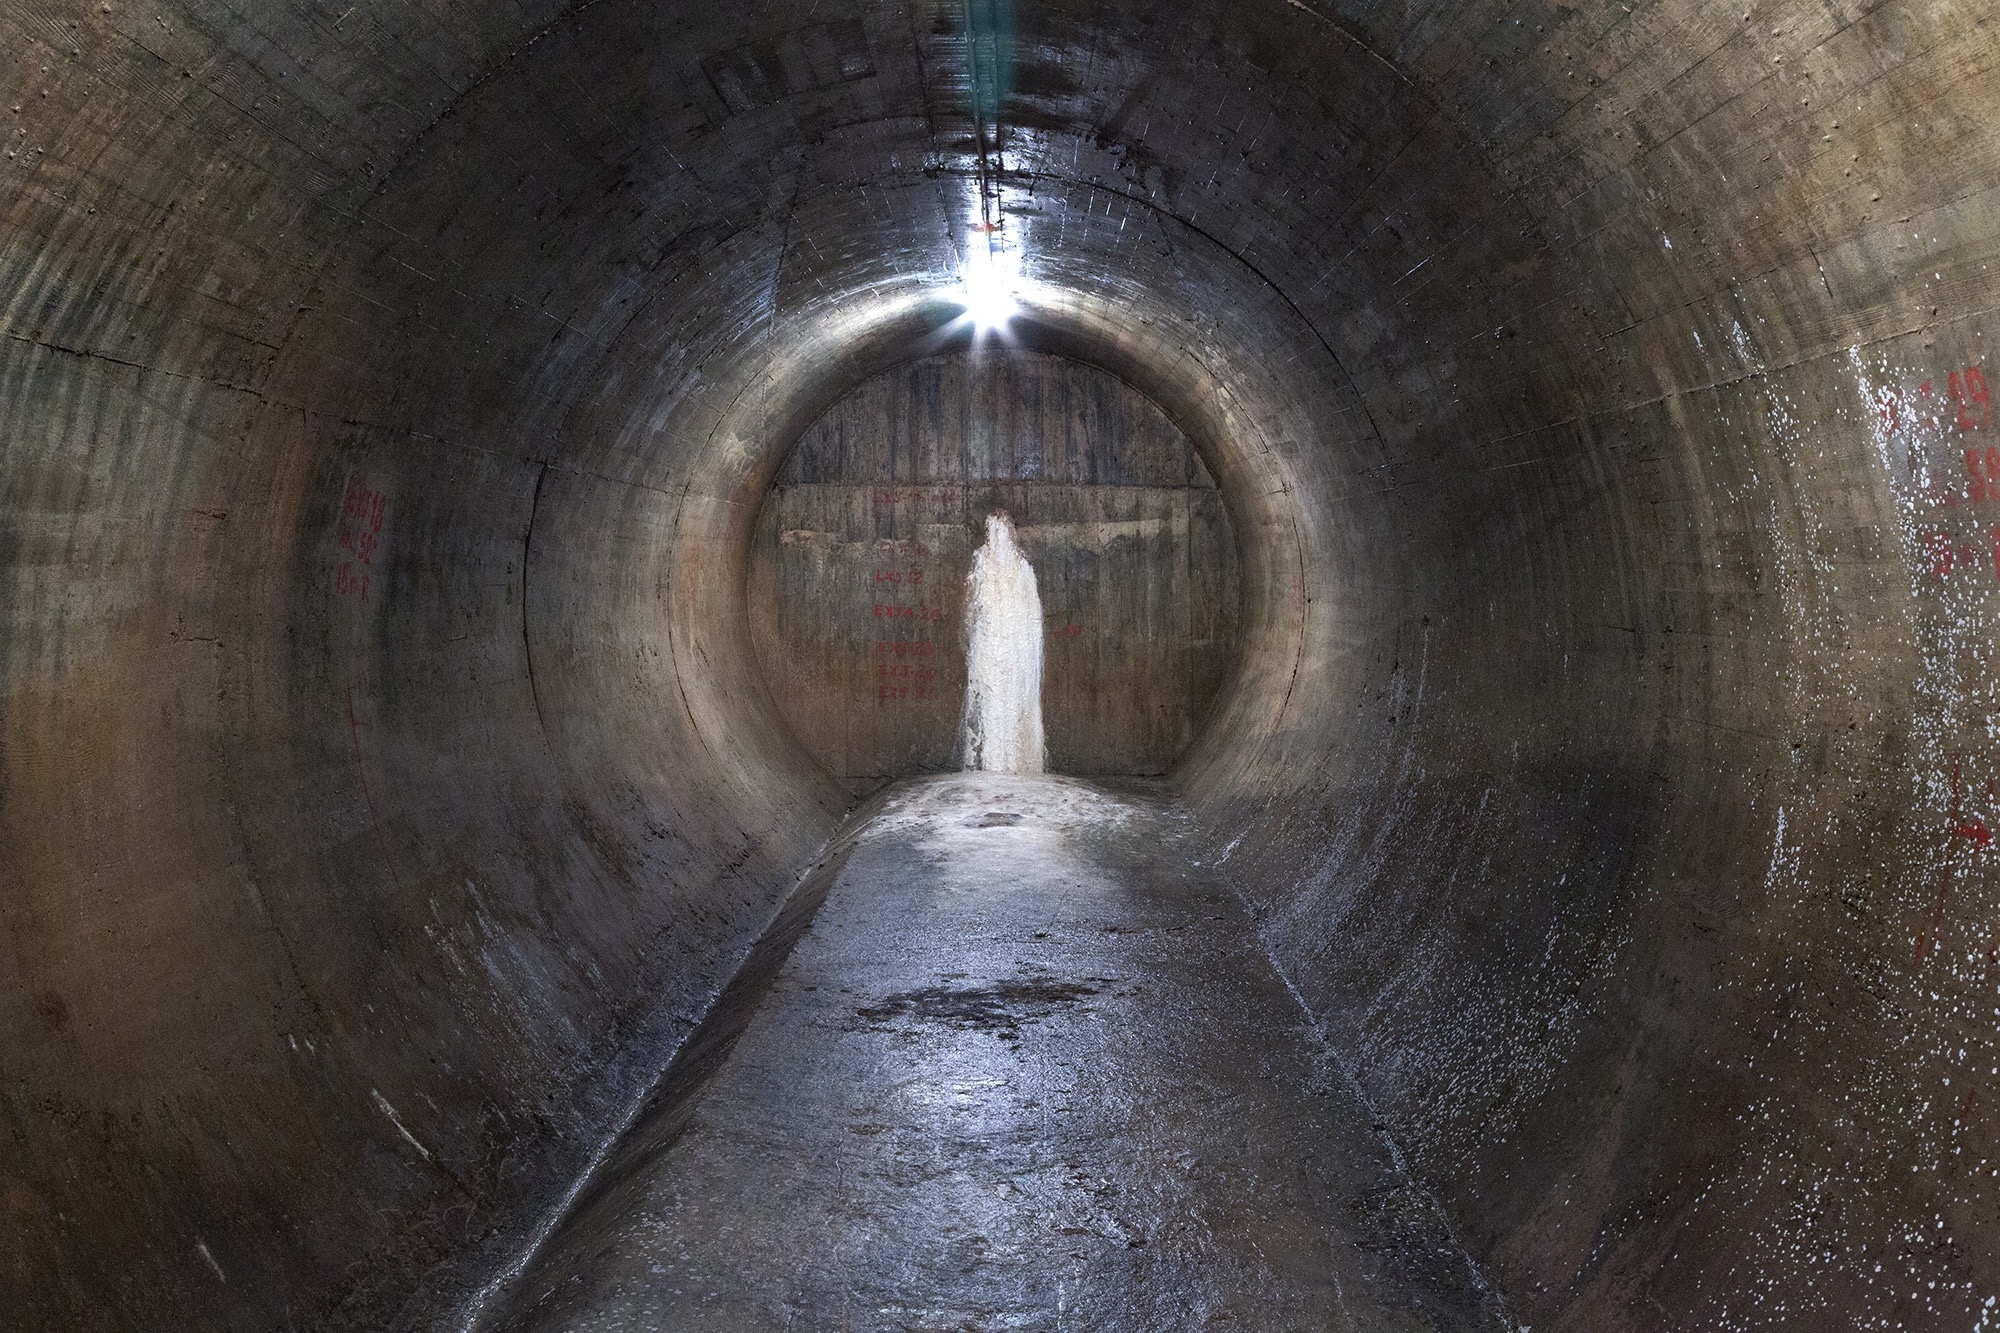 Carina Martins - Vortex - dam tunnel with calcarious in a form of a saint